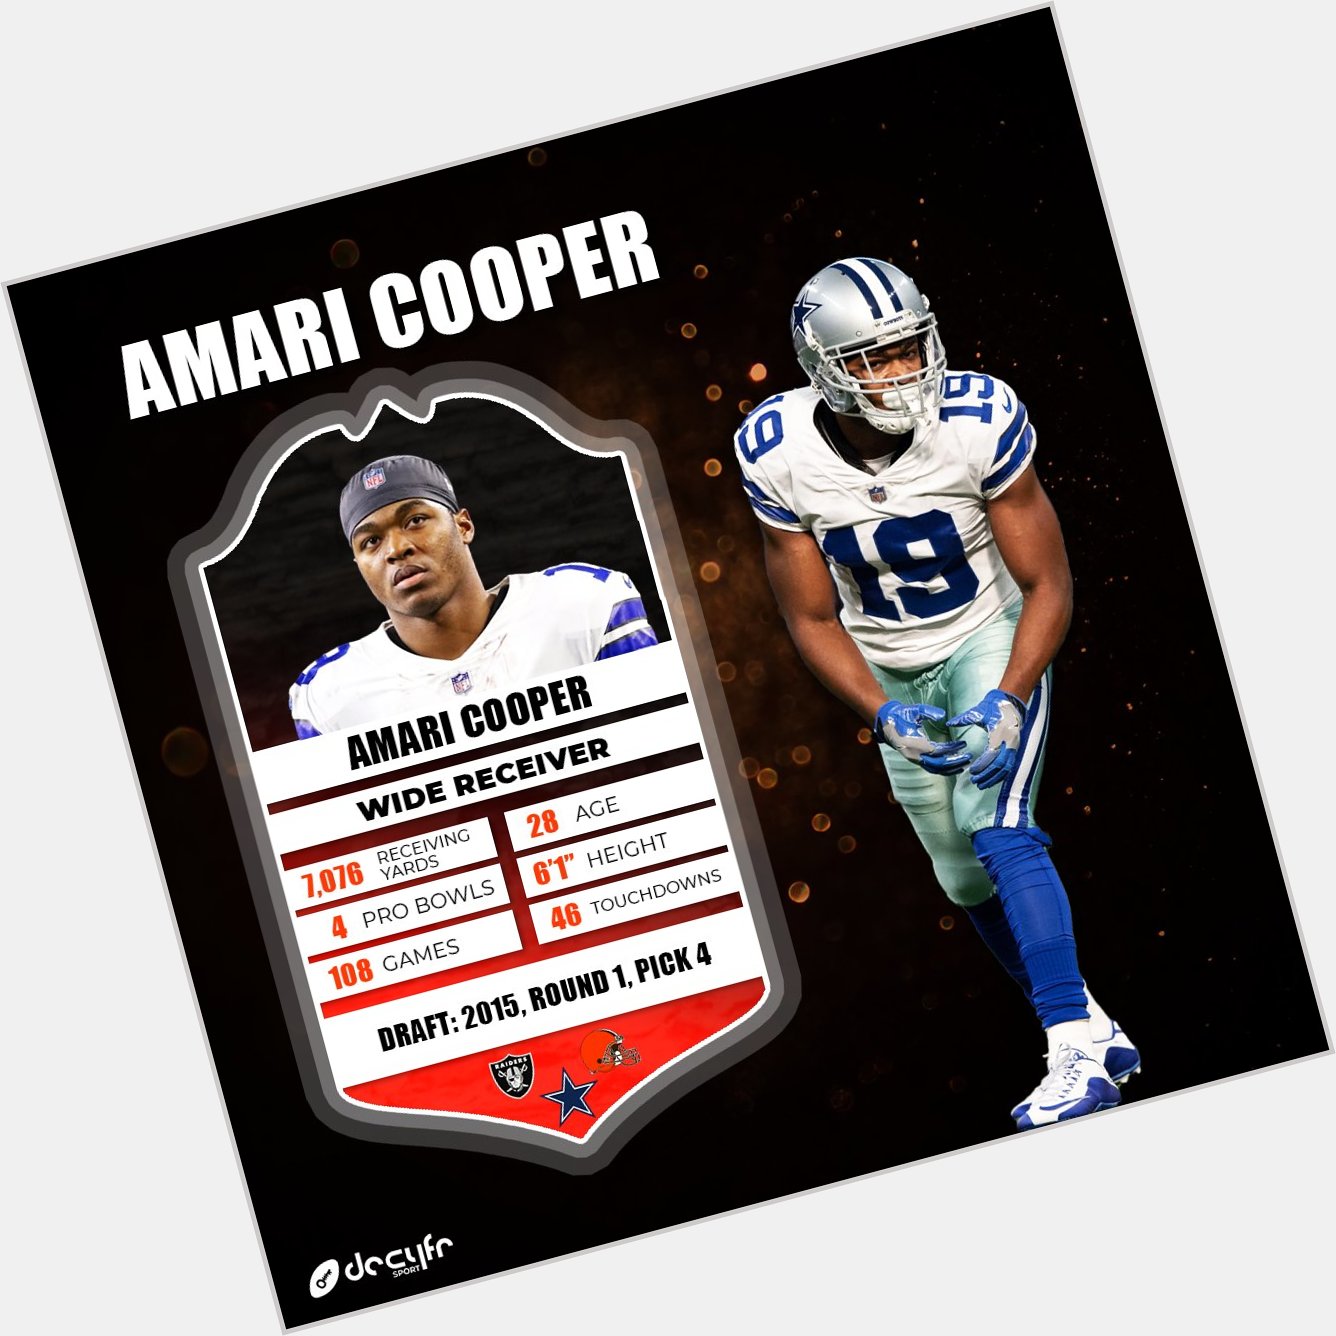 Join us in wishing receiver, Amari Cooper, a happy 28th birthday!     